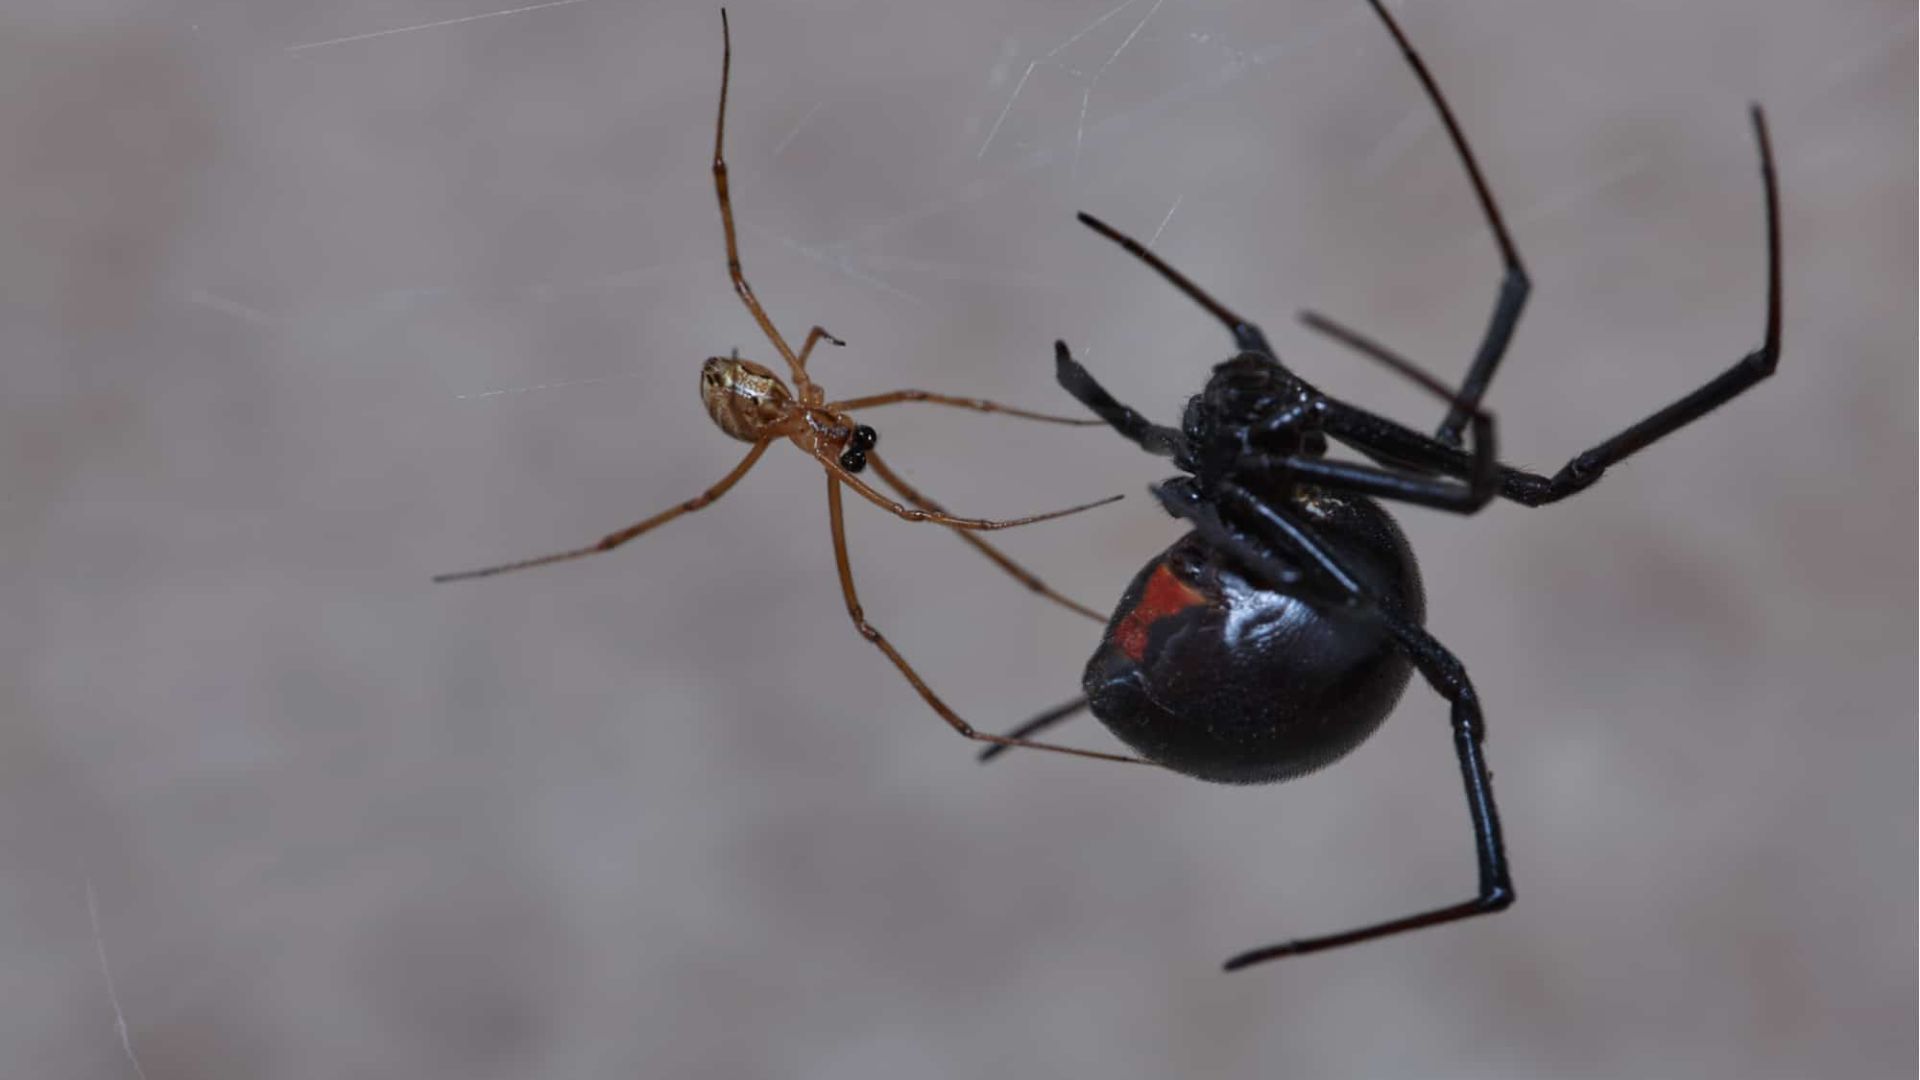 A Black Widow Spider Fighting With A Small Brown Sider